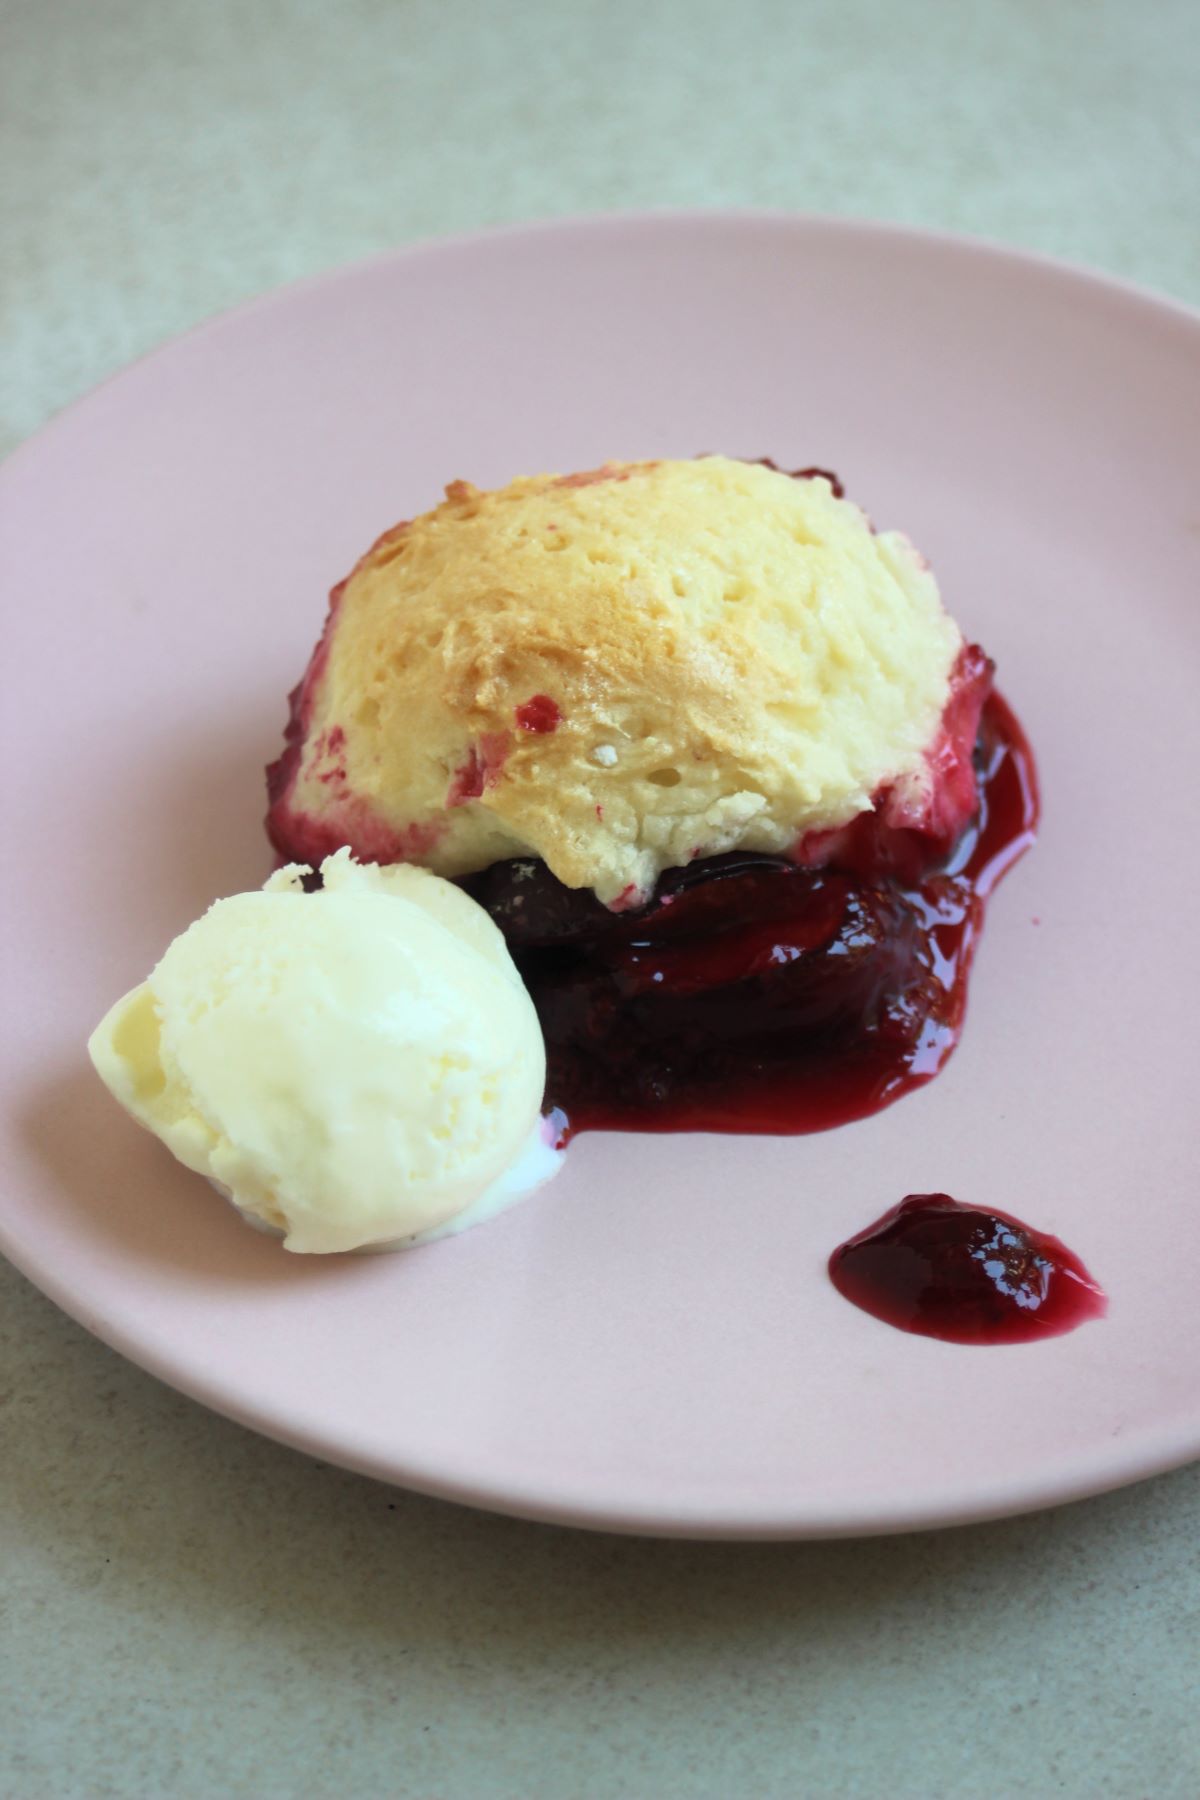 A portion of plum cobbler and a scoop of ice cream on a pink plate.